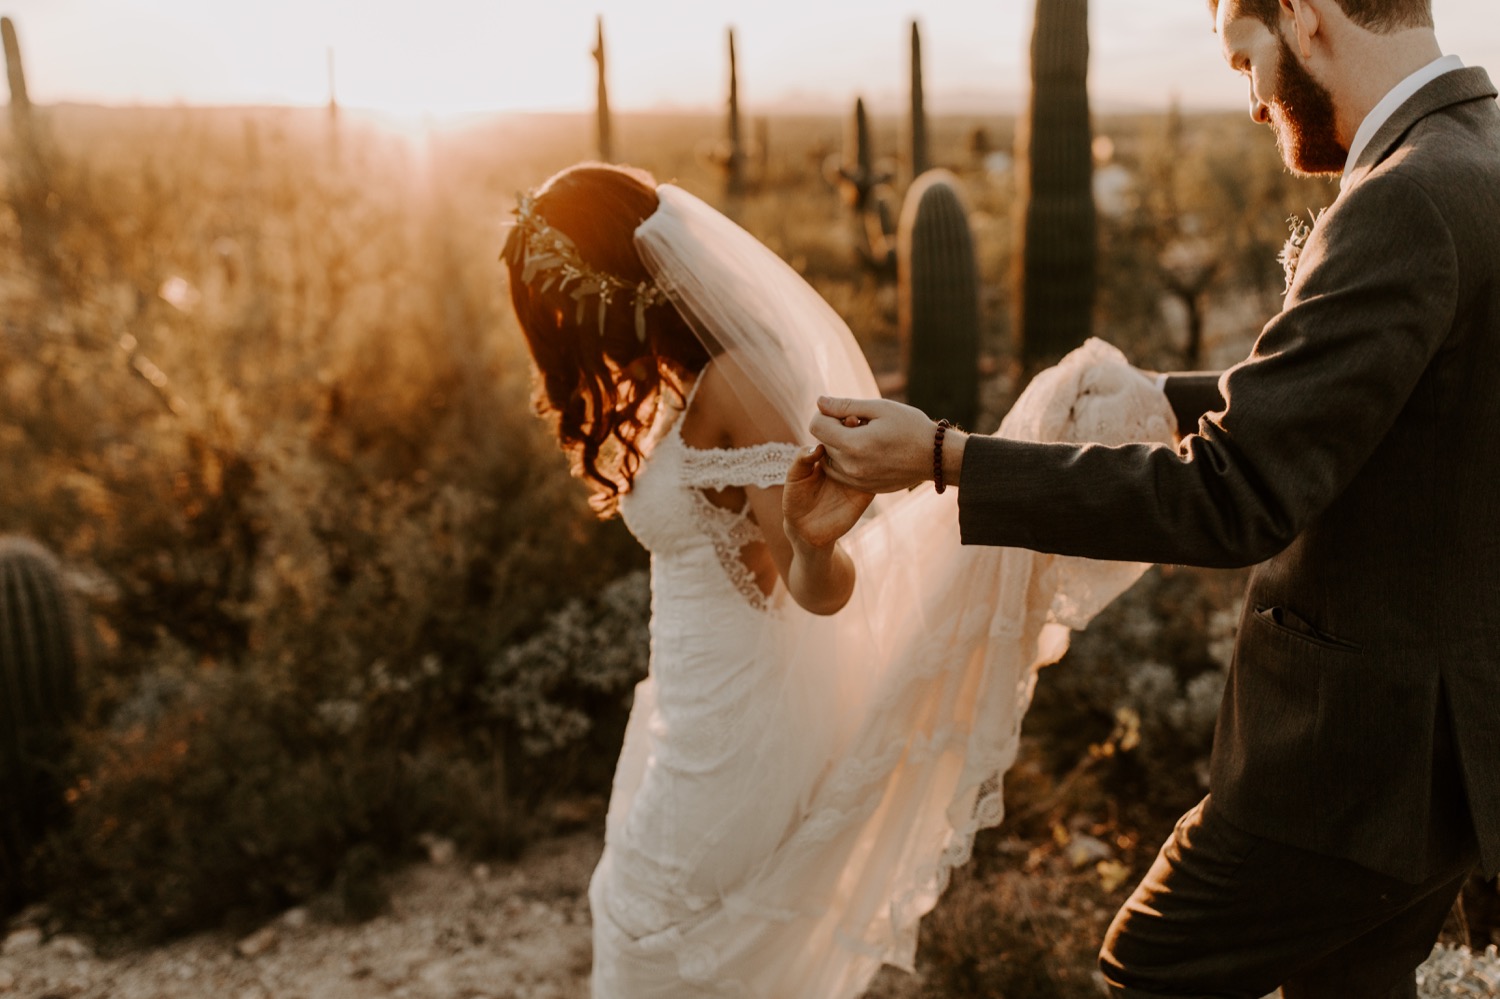 The groom helping his bride walk into the desert sunset.